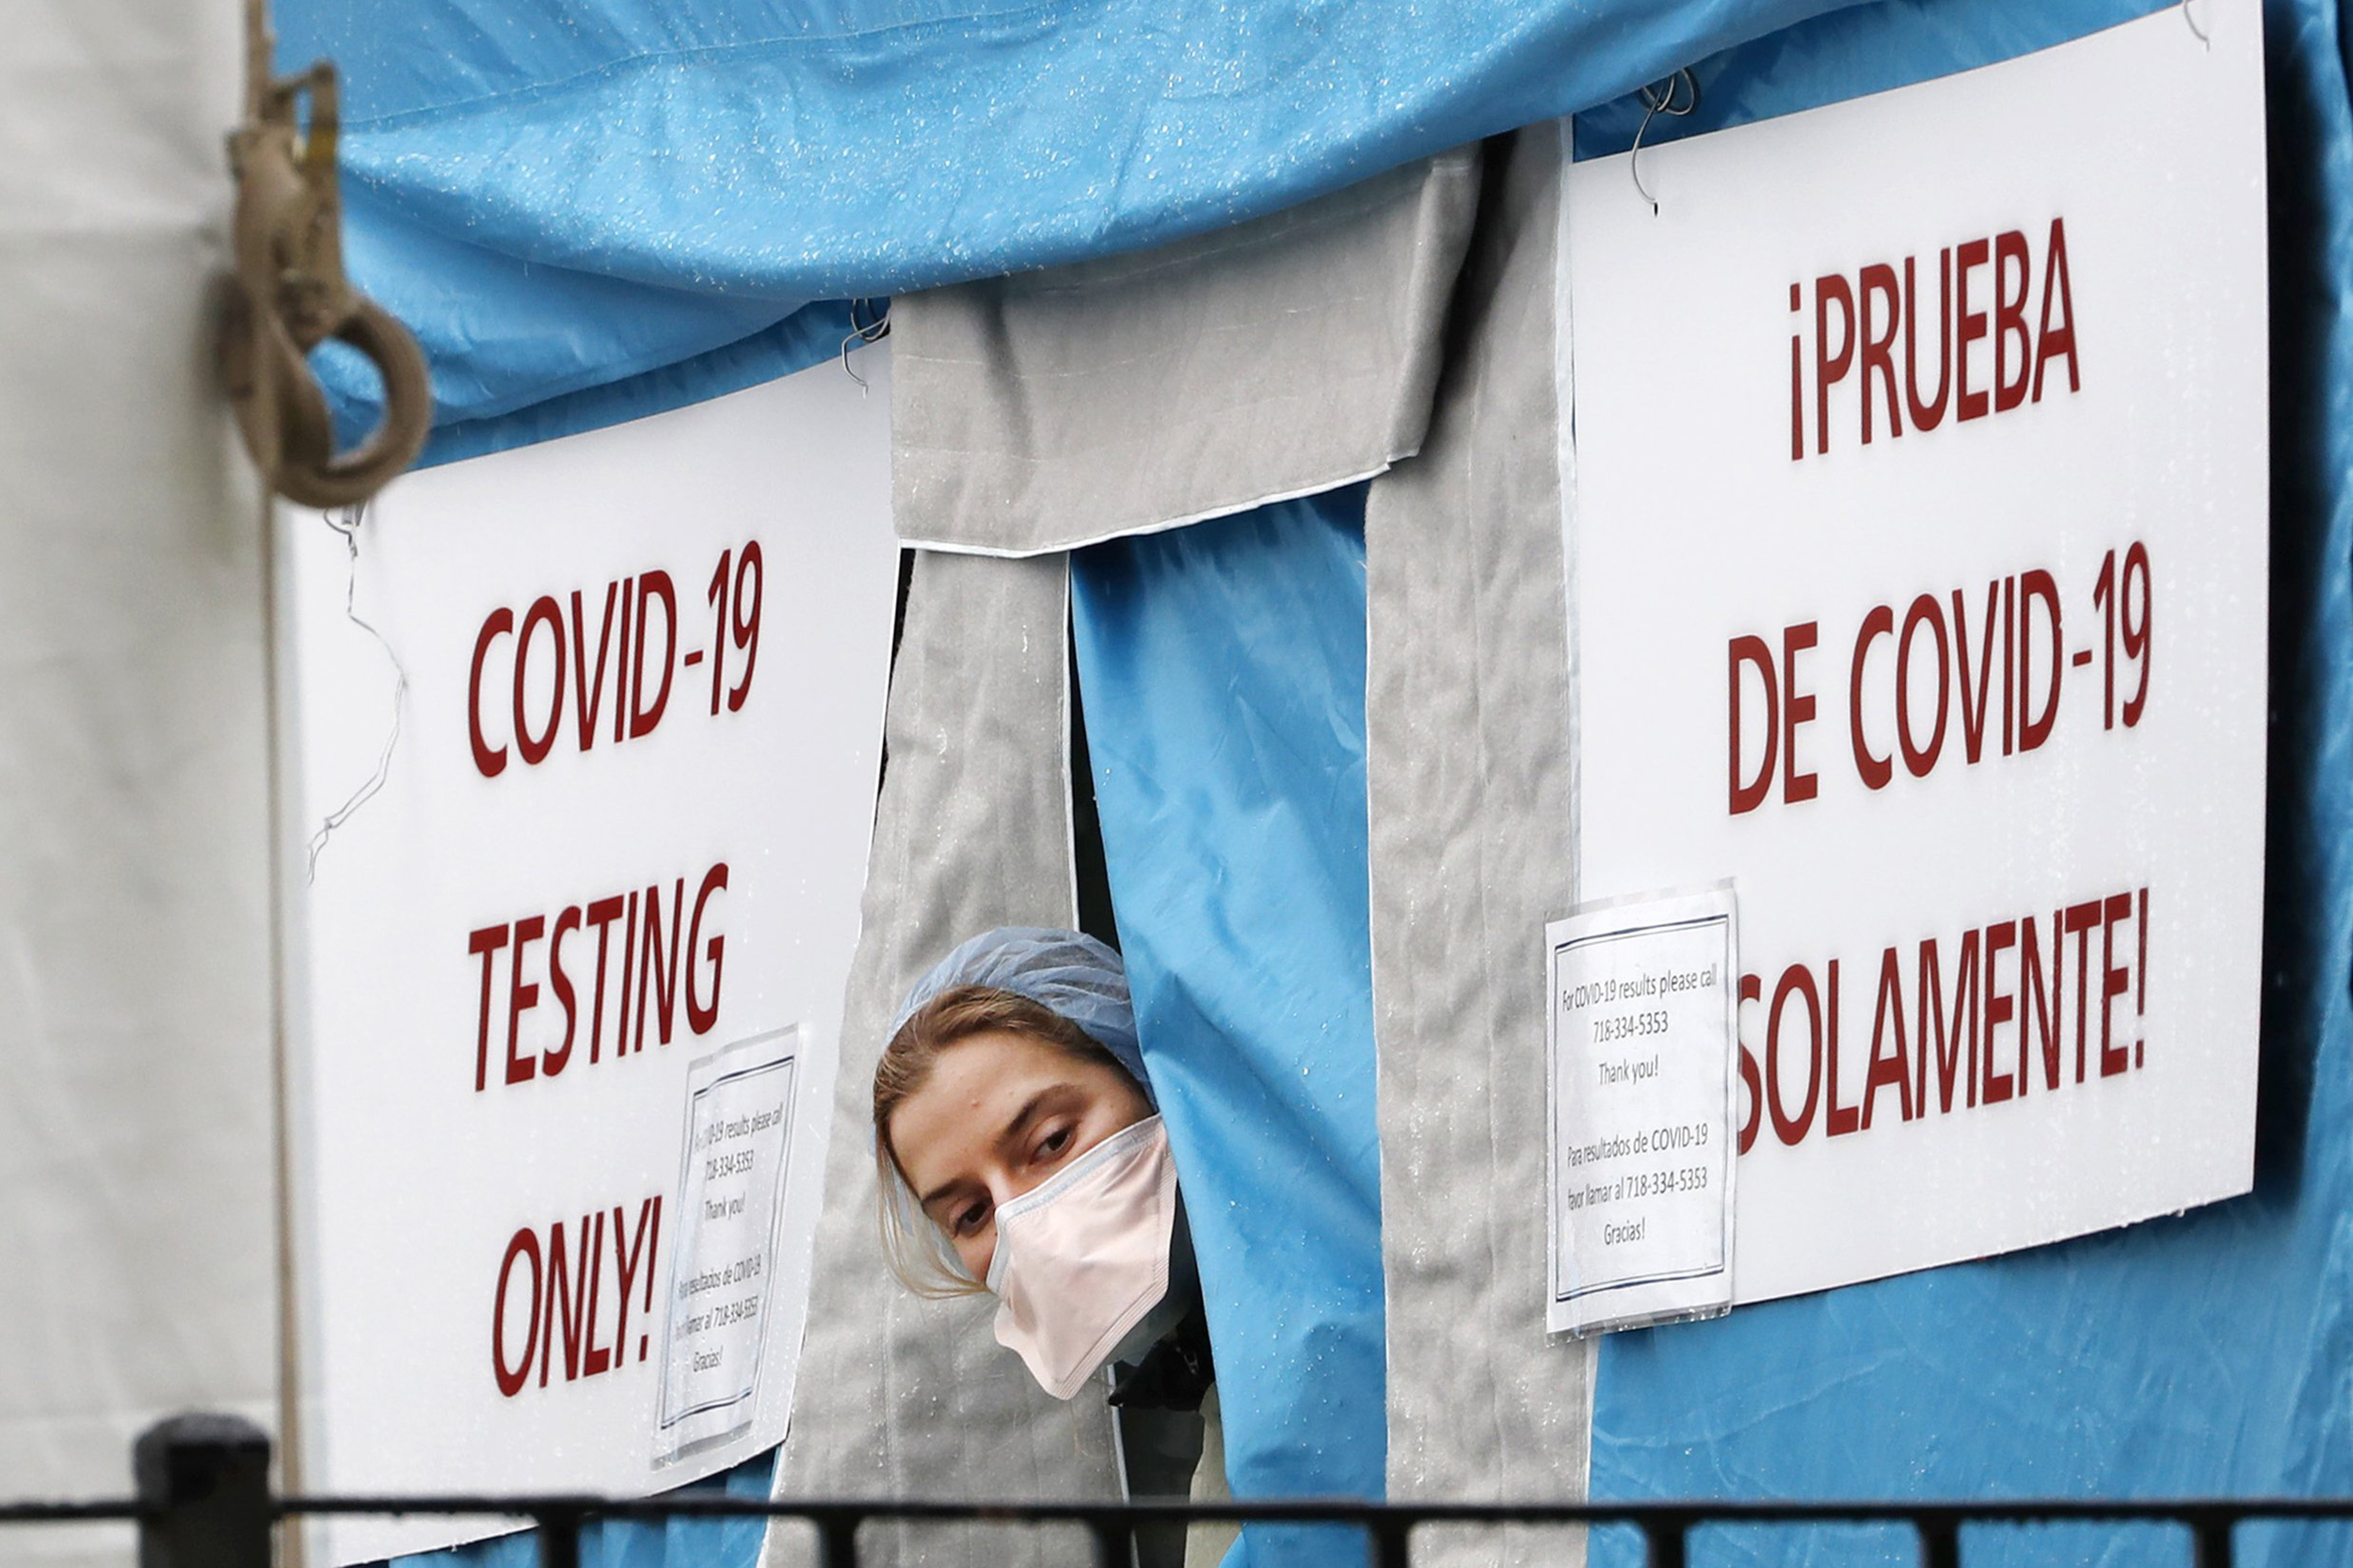 Nurse in scrubs and mask looking out from a temporary tent hung with signs for 'Covid-19 testing' in English and Spanish